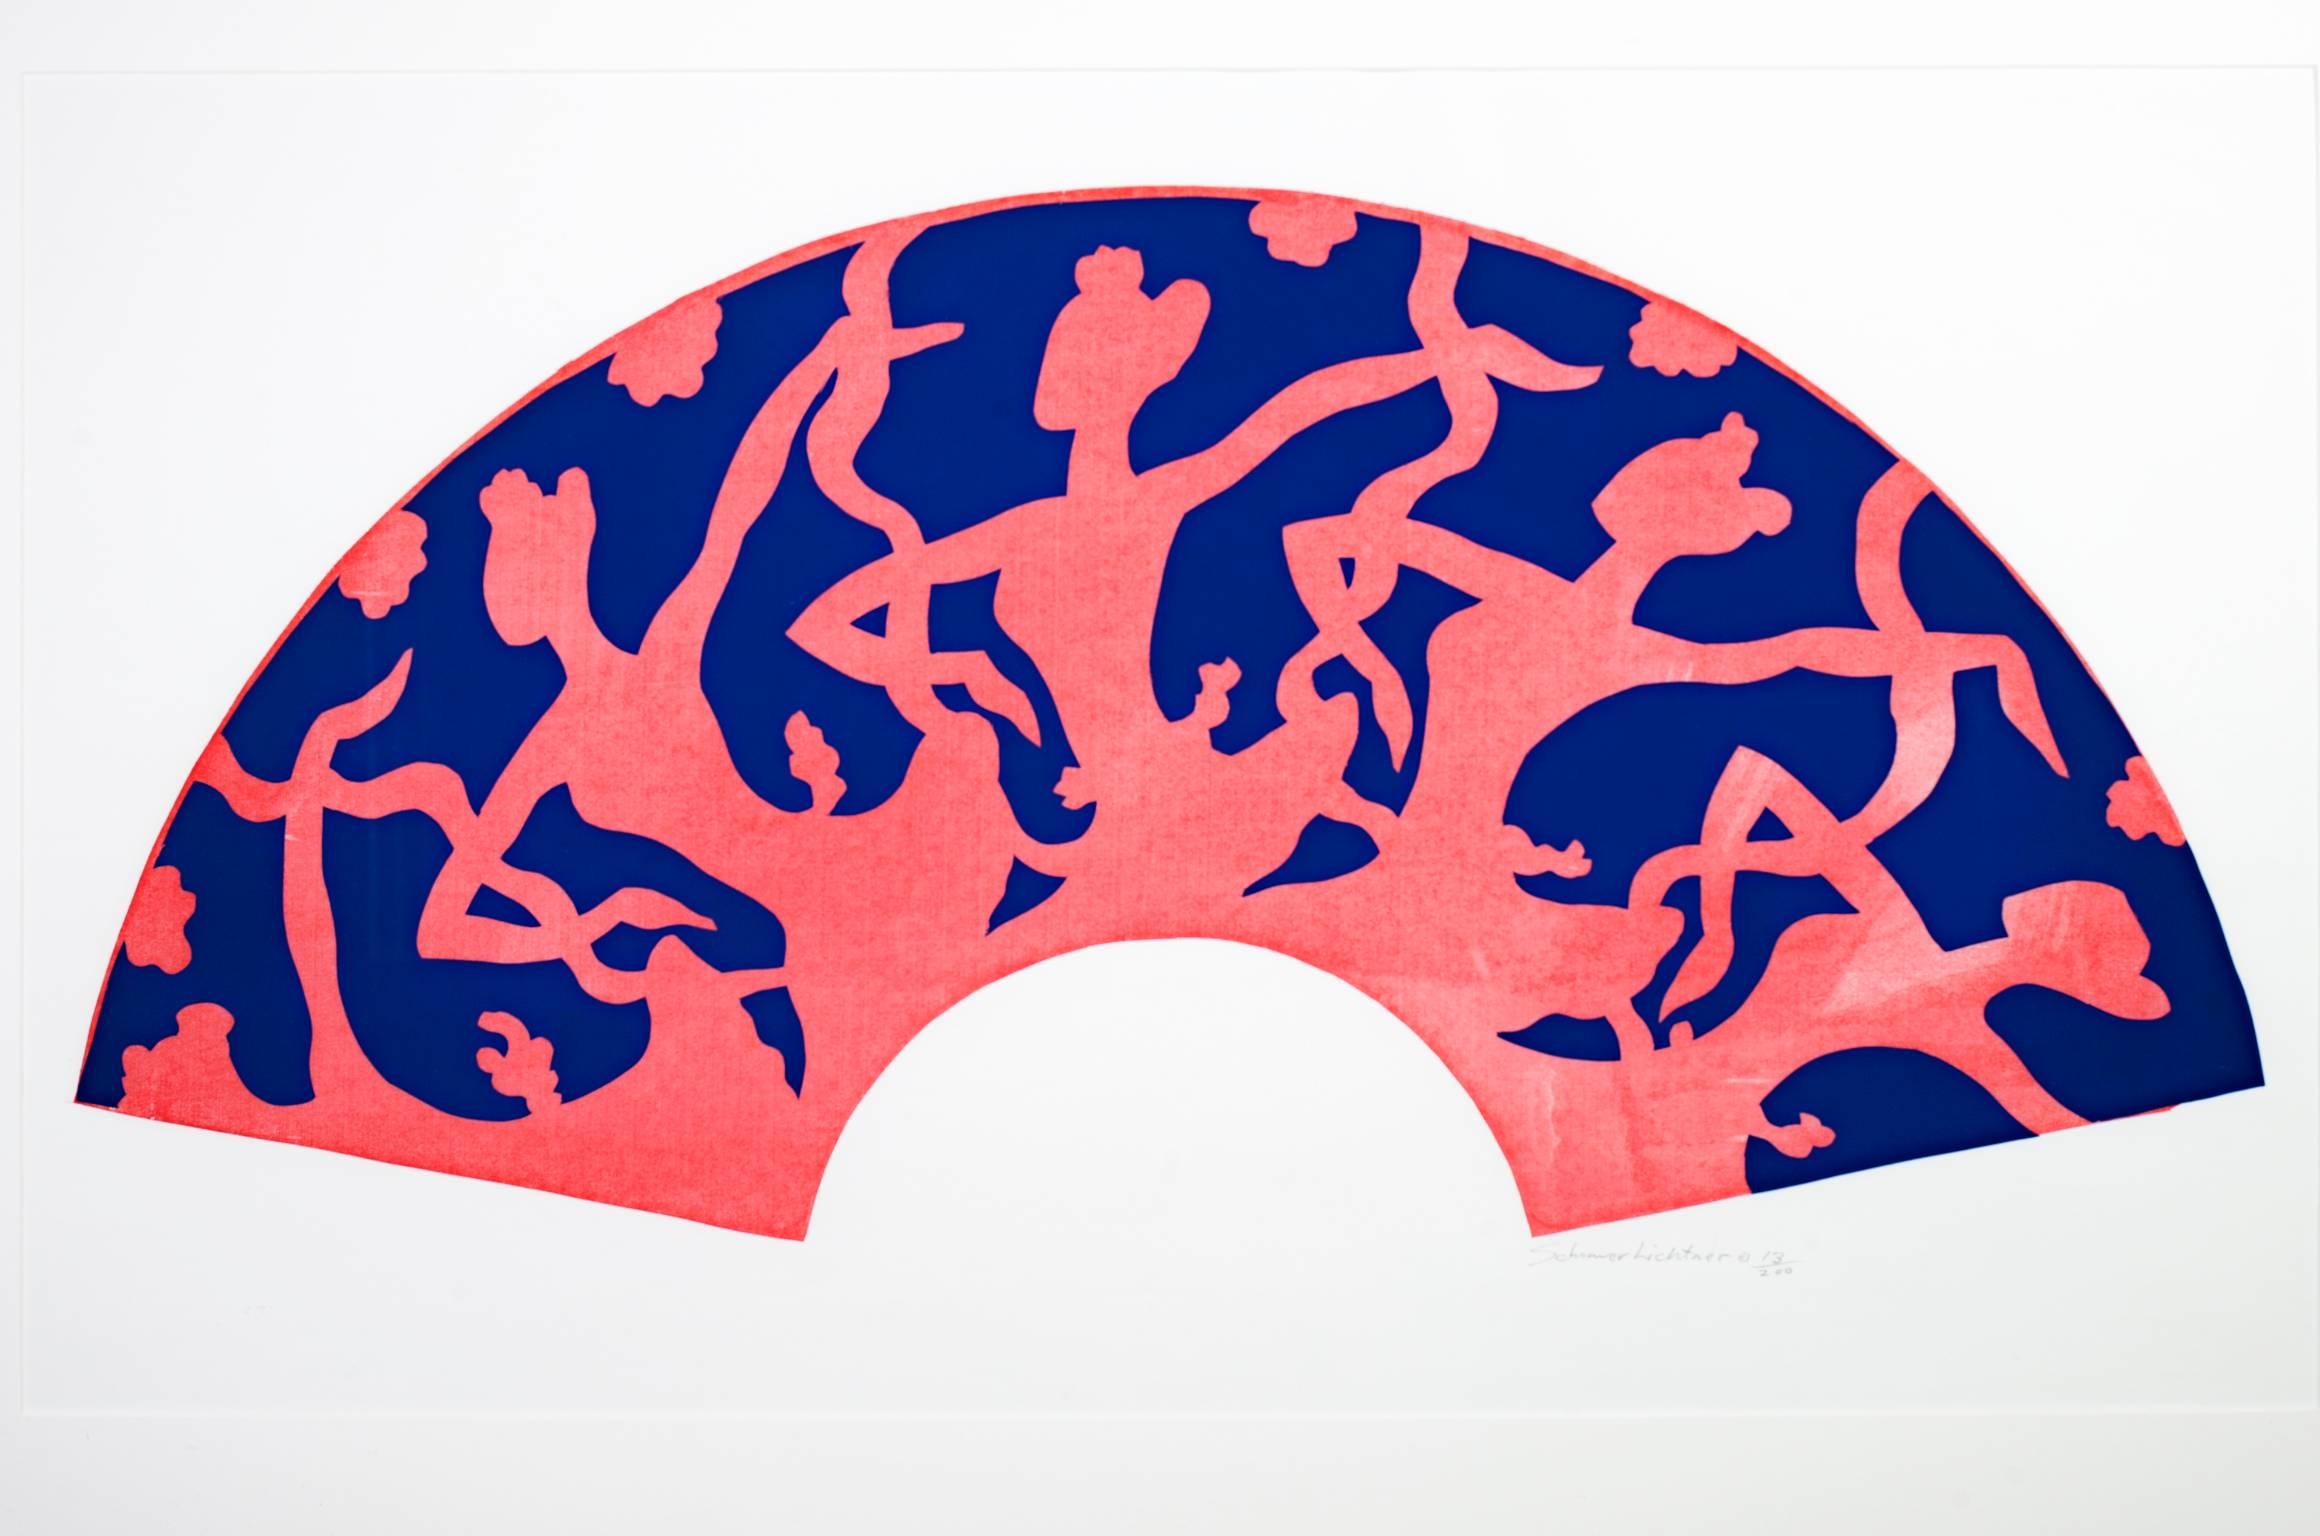 "Fan Shape with Dancers" is a silkscreen print by Schomer Lichtner in blue and pink. The print is signed in pencil lower right and is edition 13/200. 

16" x 33" art
27 5/8" x 42 1/8" framed

Schomer Lichtner was a Milwaukee-based artist who started